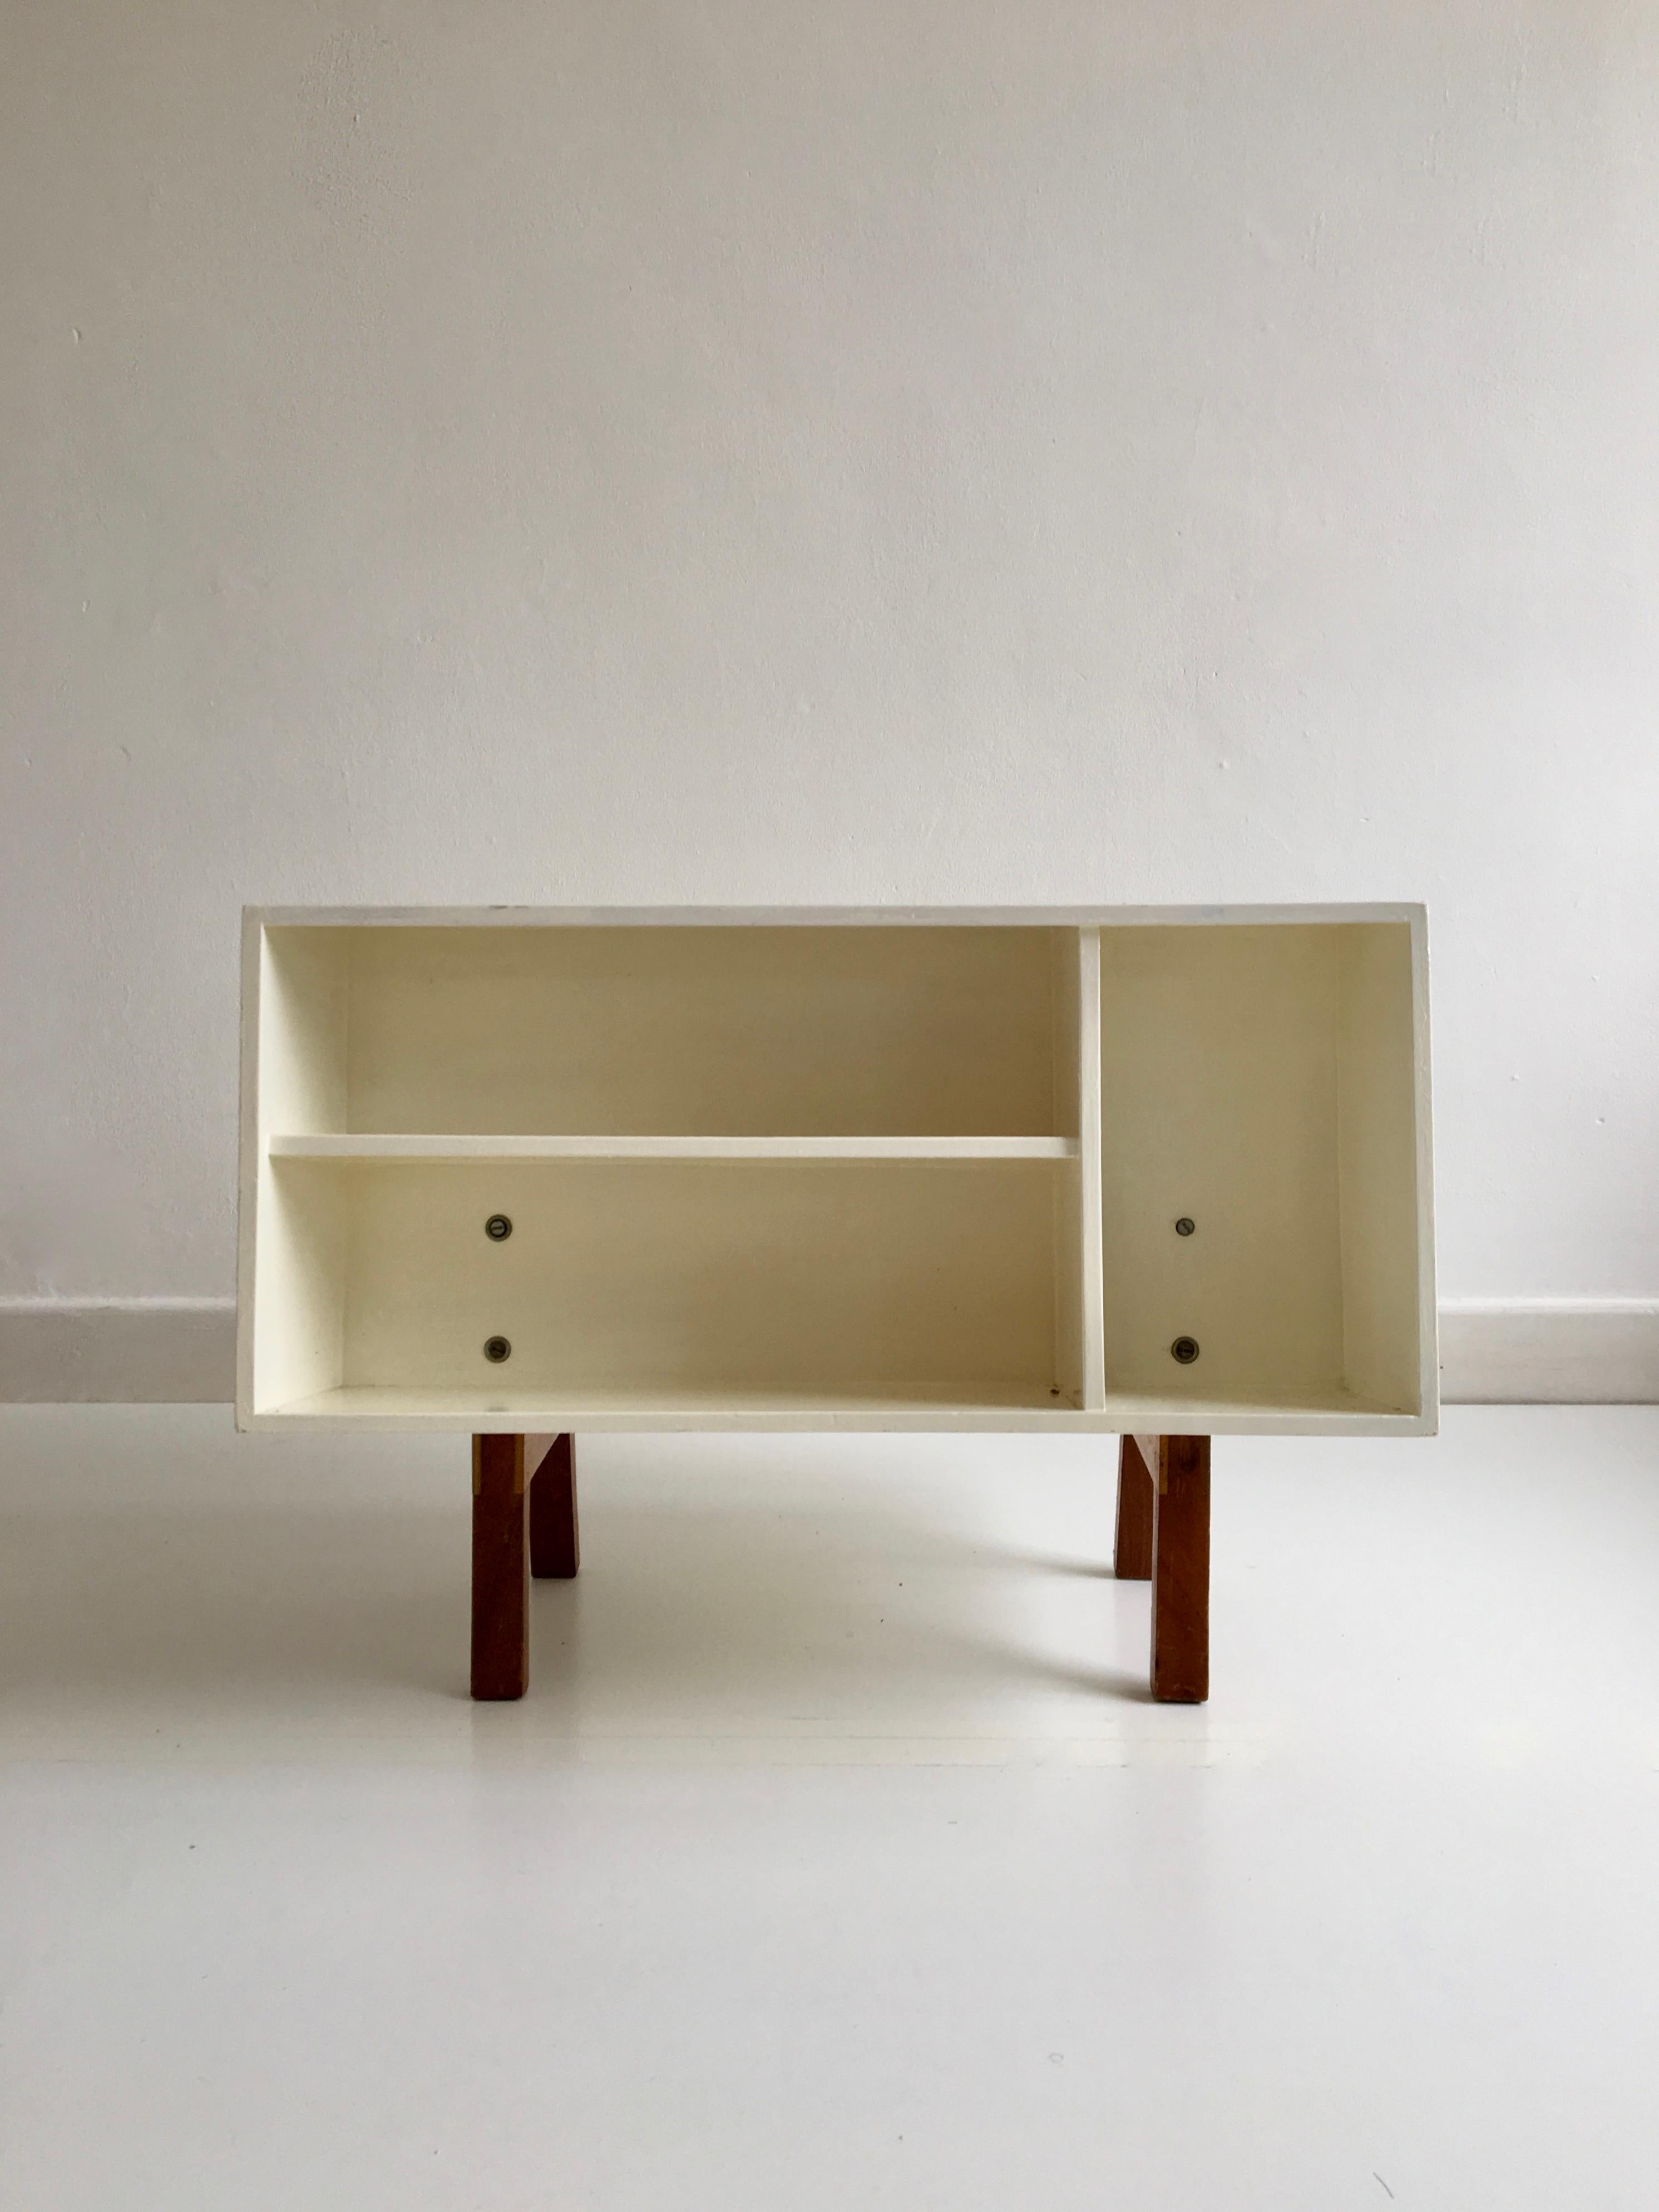 Vintage 'Isokon Penguin Donkey 2' bookcase / coffee table designed by Ernest Race for Isokon in 1962.
  